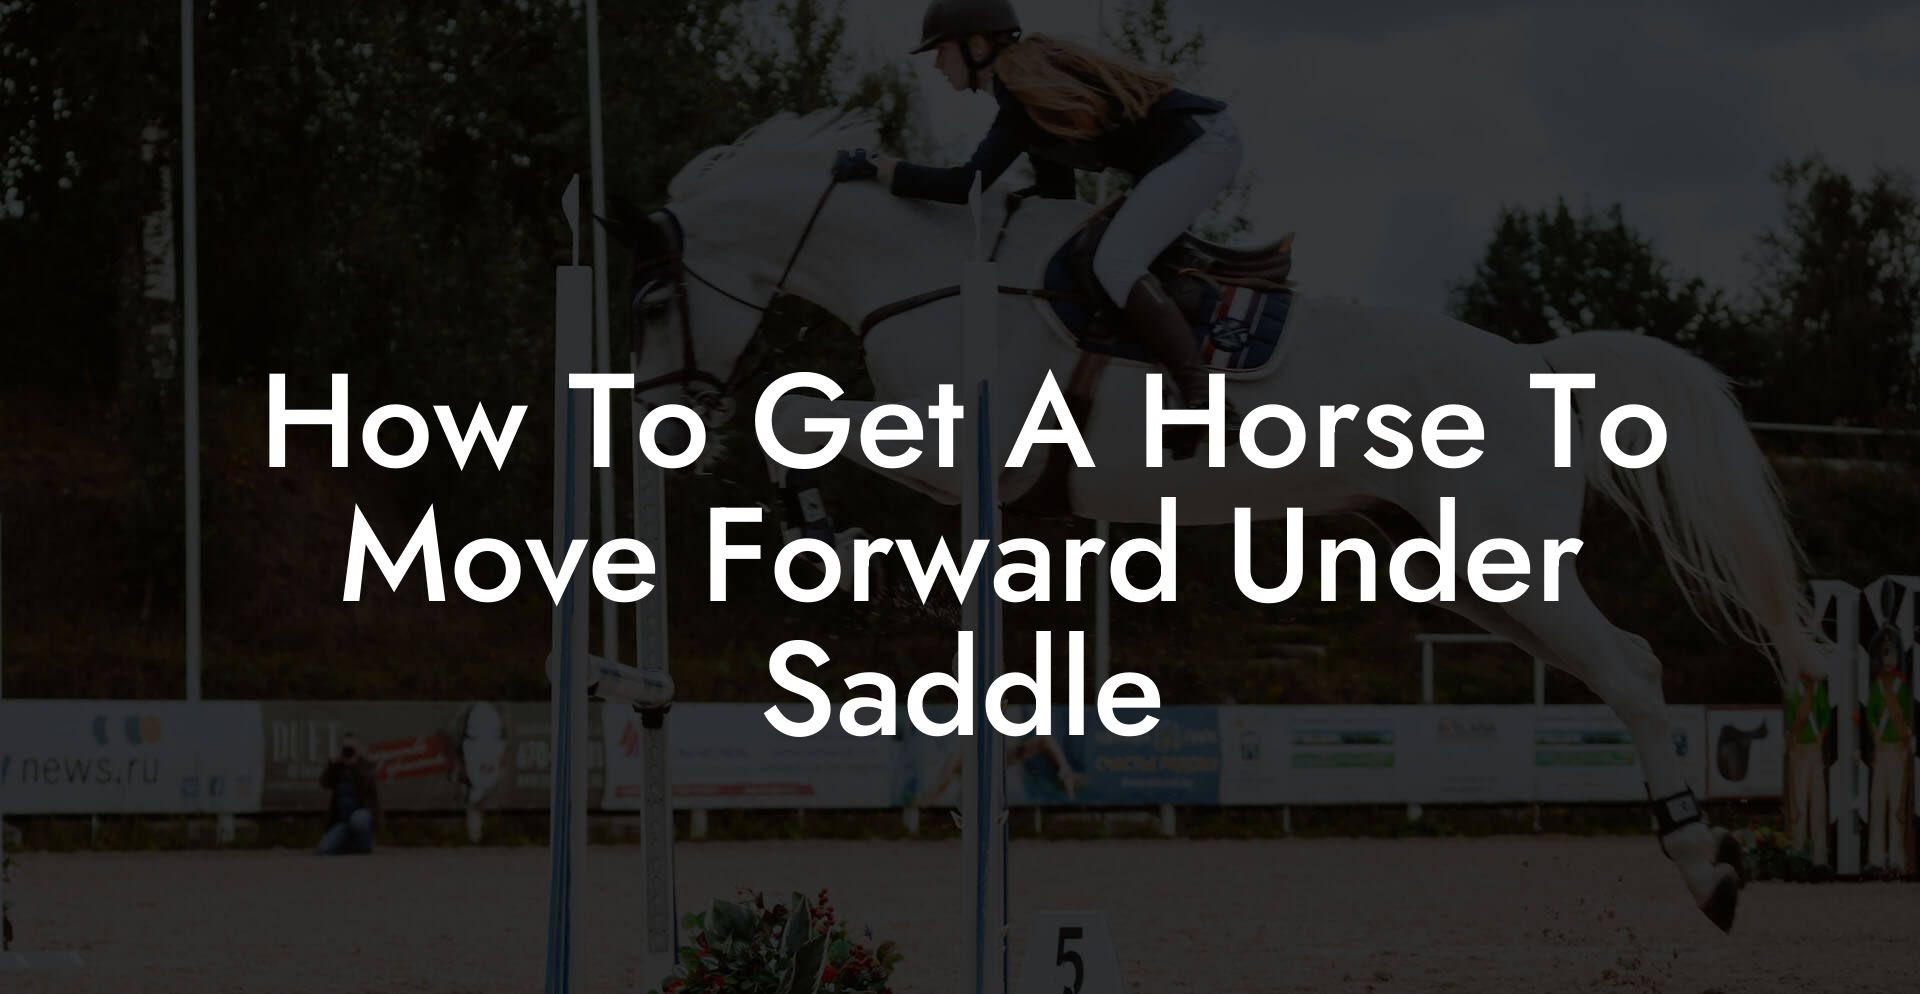 How To Get A Horse To Move Forward Under Saddle